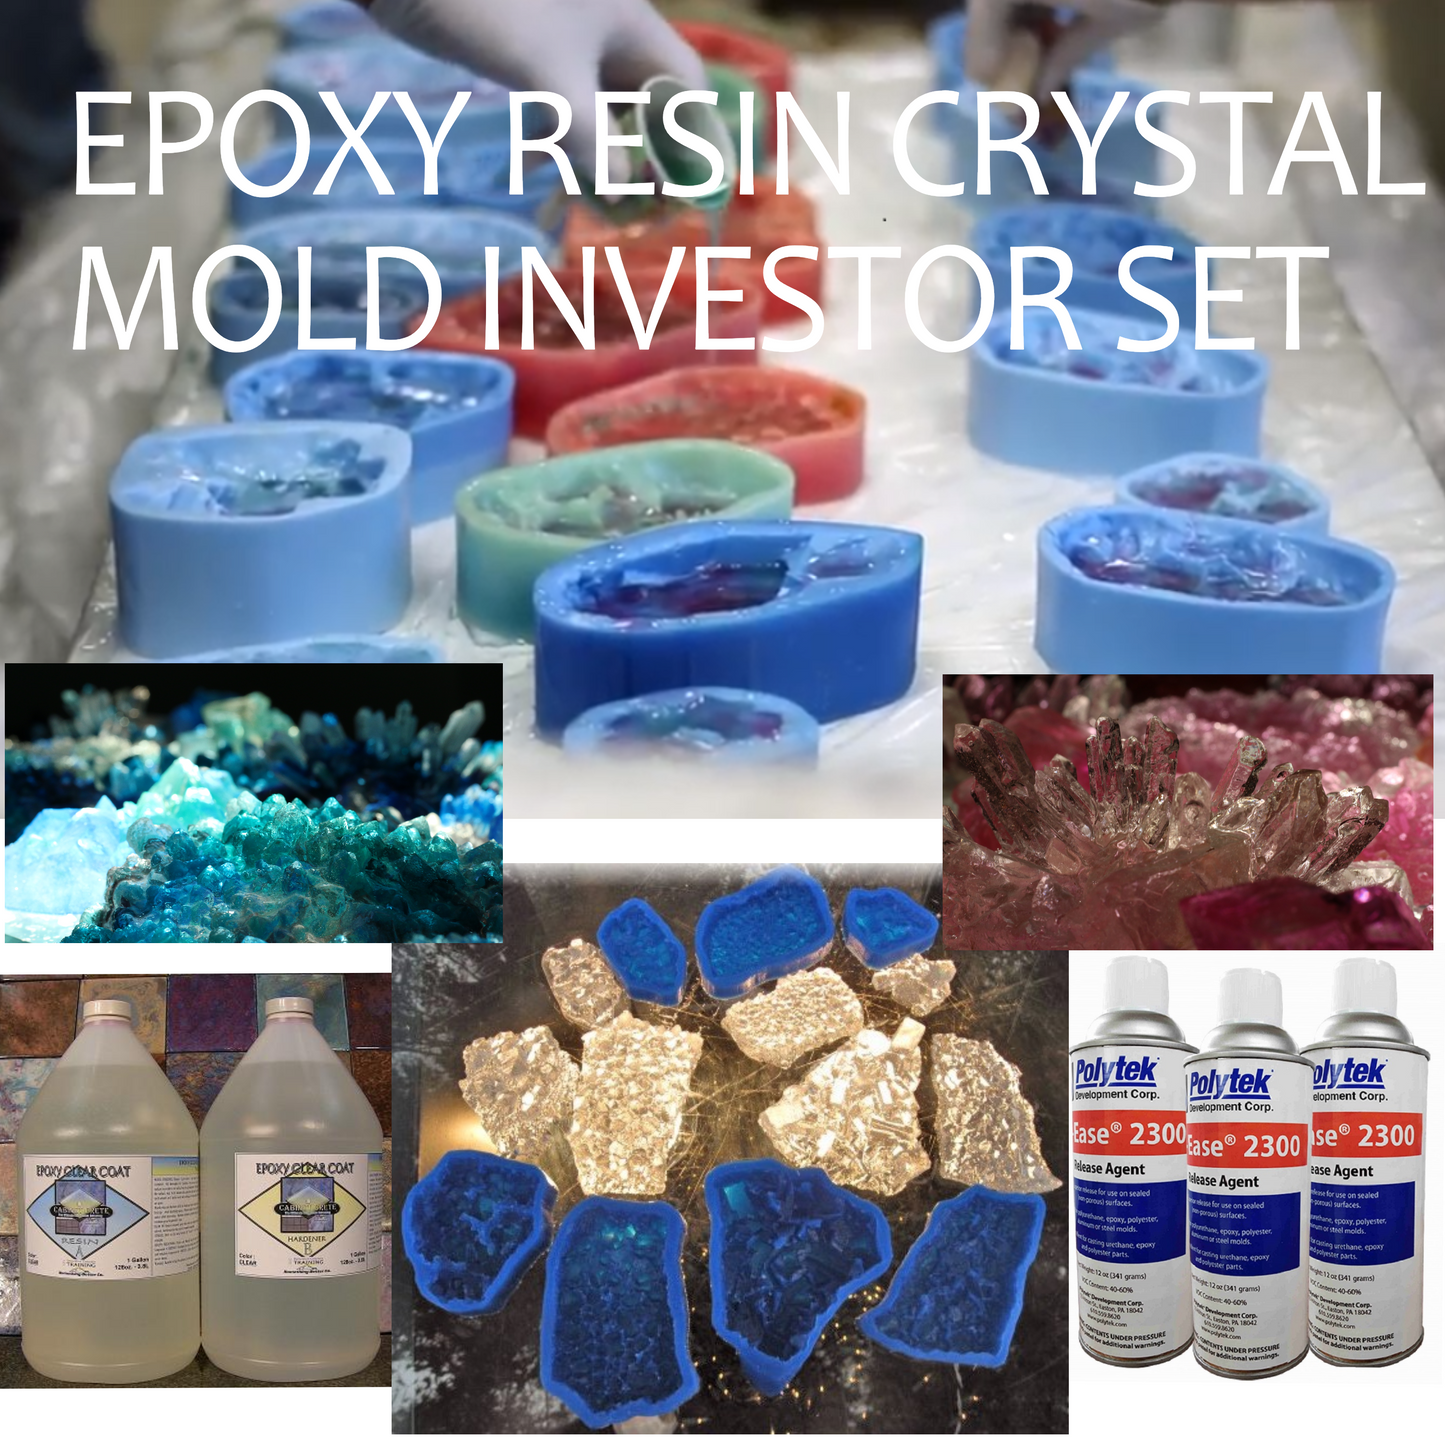 Epoxy Resin Molds - Exquisite Crystal Mold Kit - 26 Crystal Molds